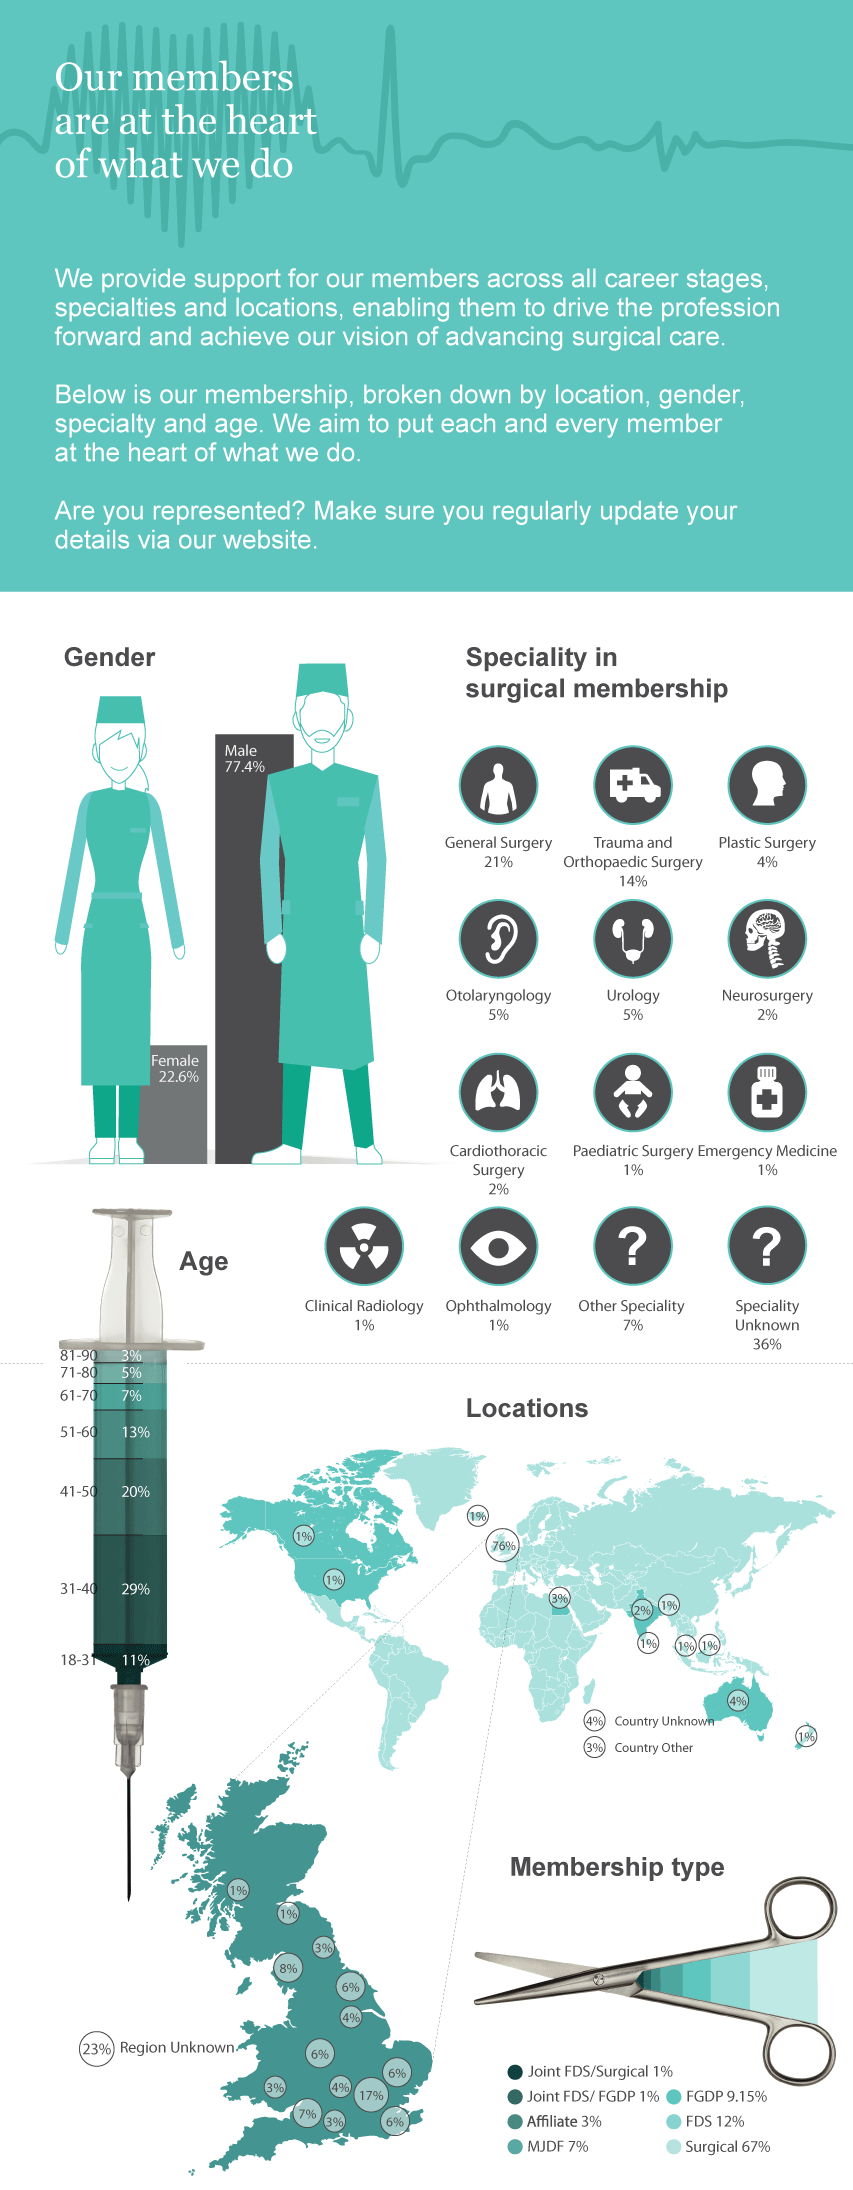 An infographic presenting statistics on our members